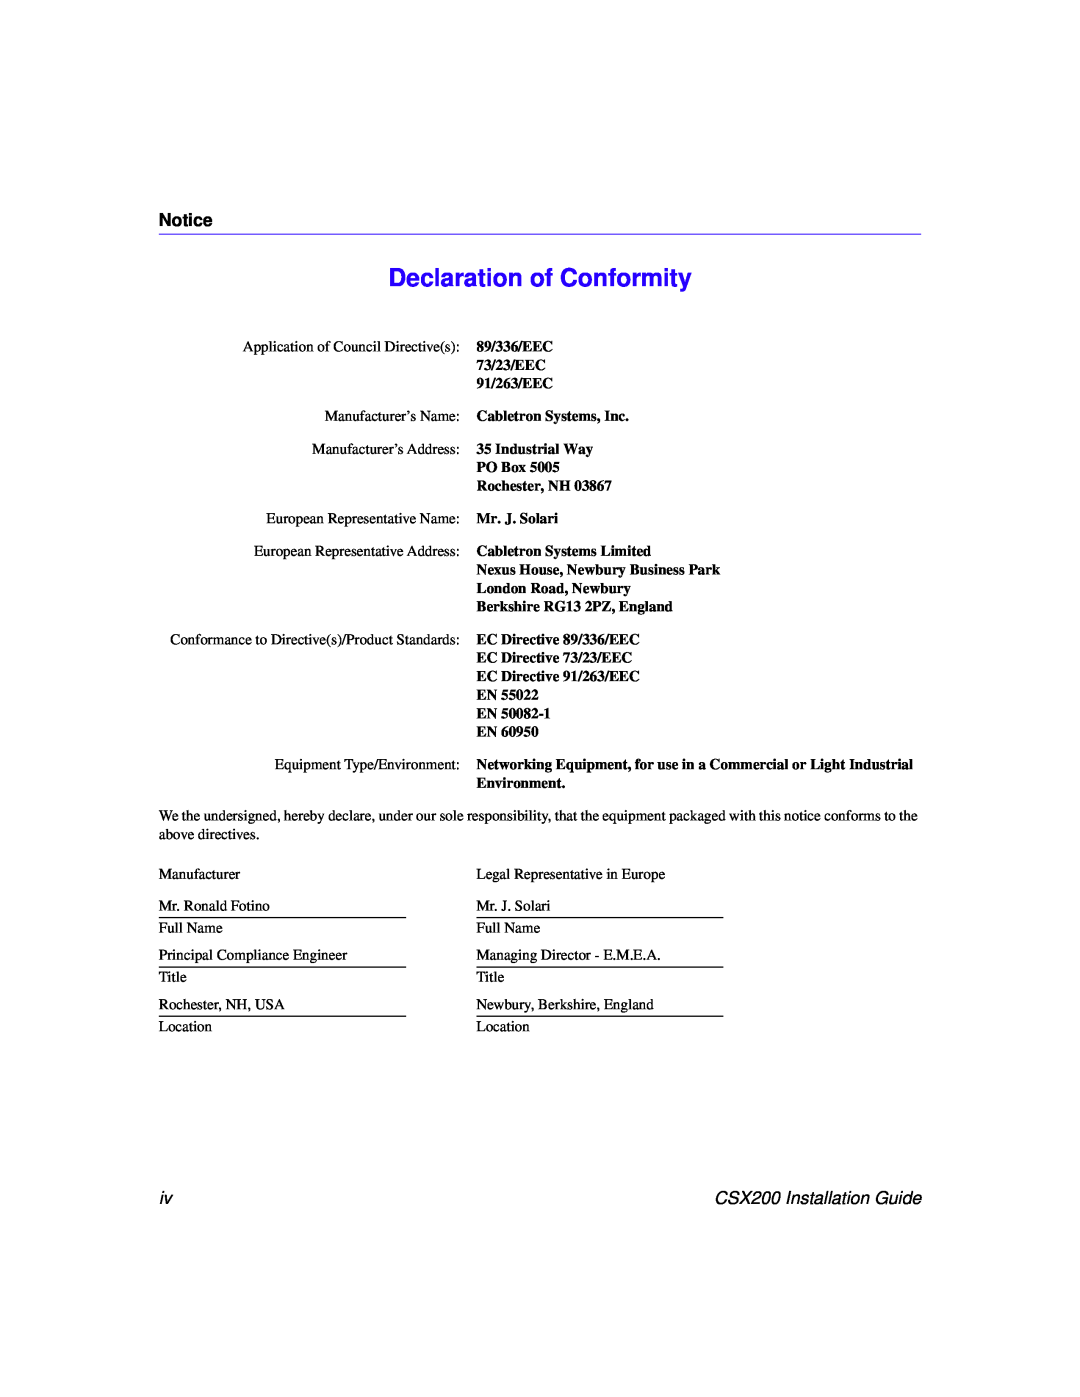 Cabletron Systems manual Declaration of Conformity, CSX200 Installation Guide 